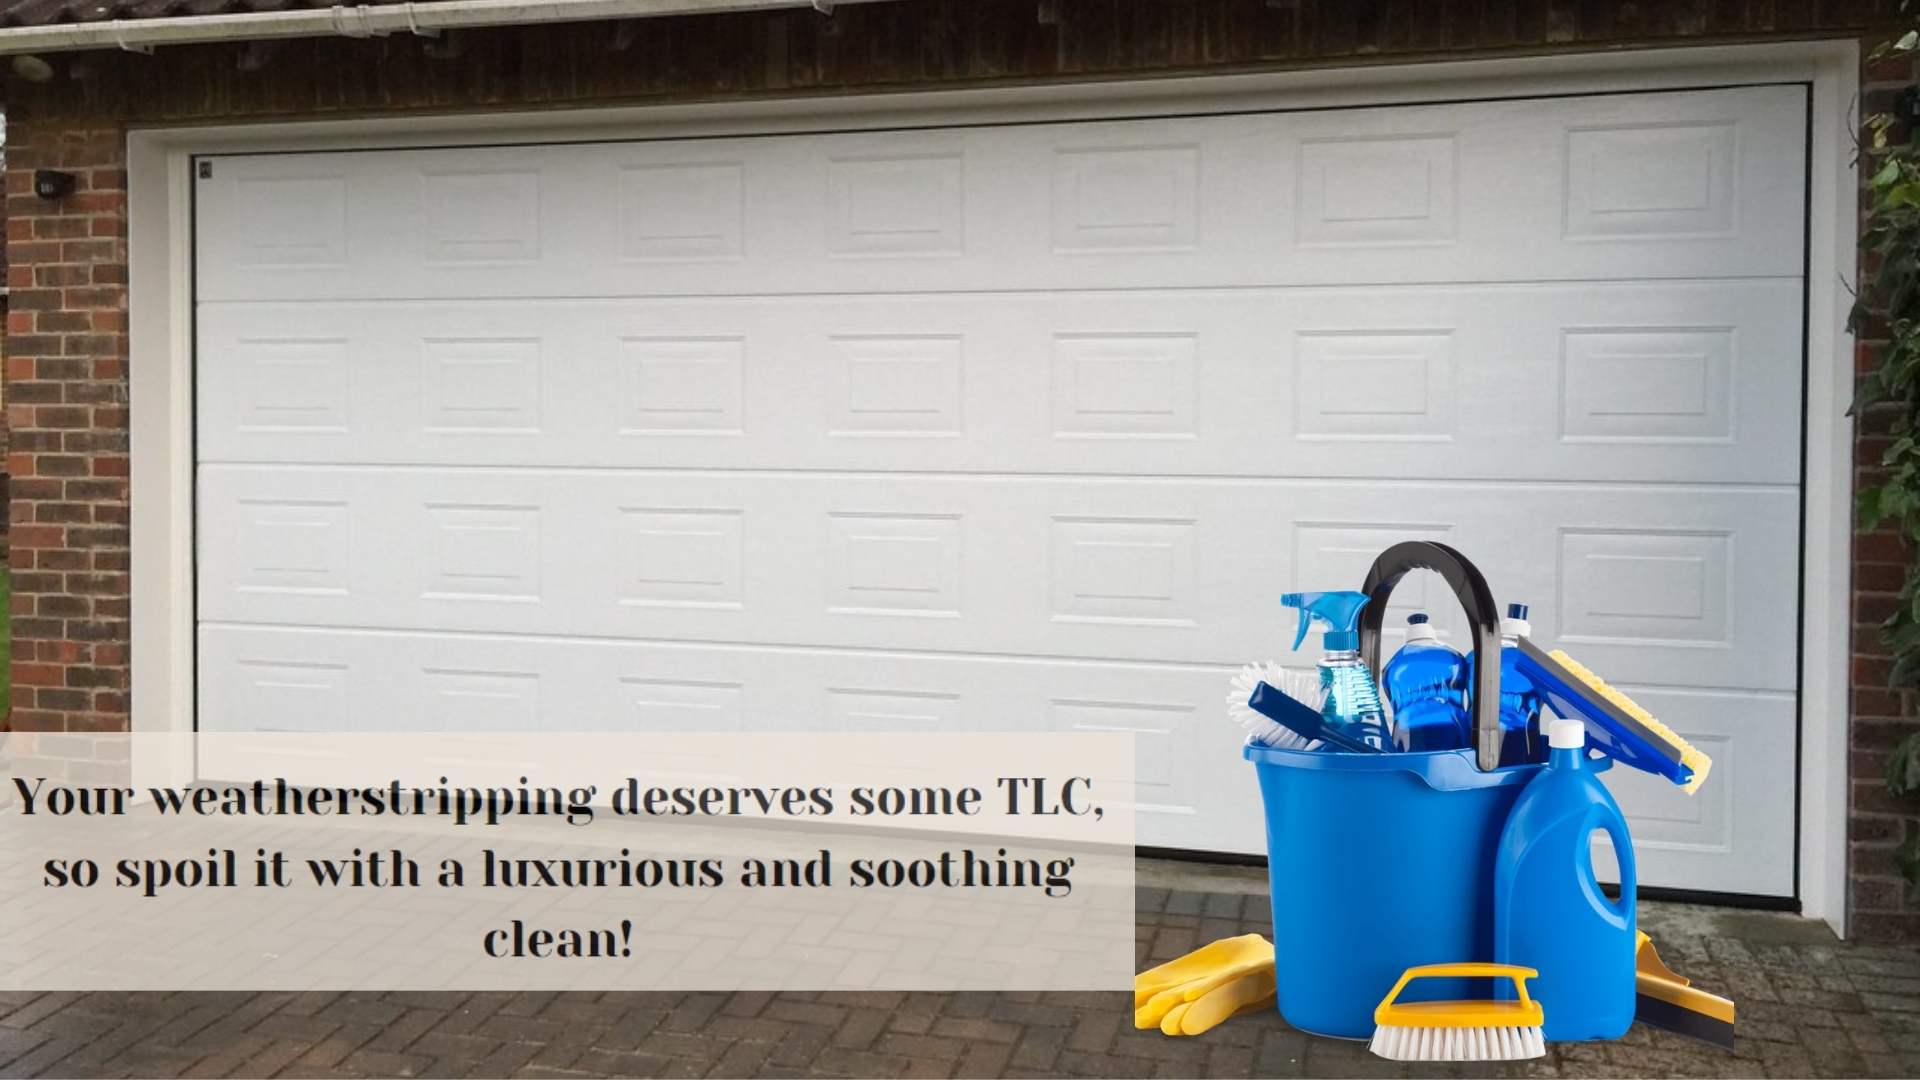 Clean your garage door weatherstripping so that you do not have to replace them often